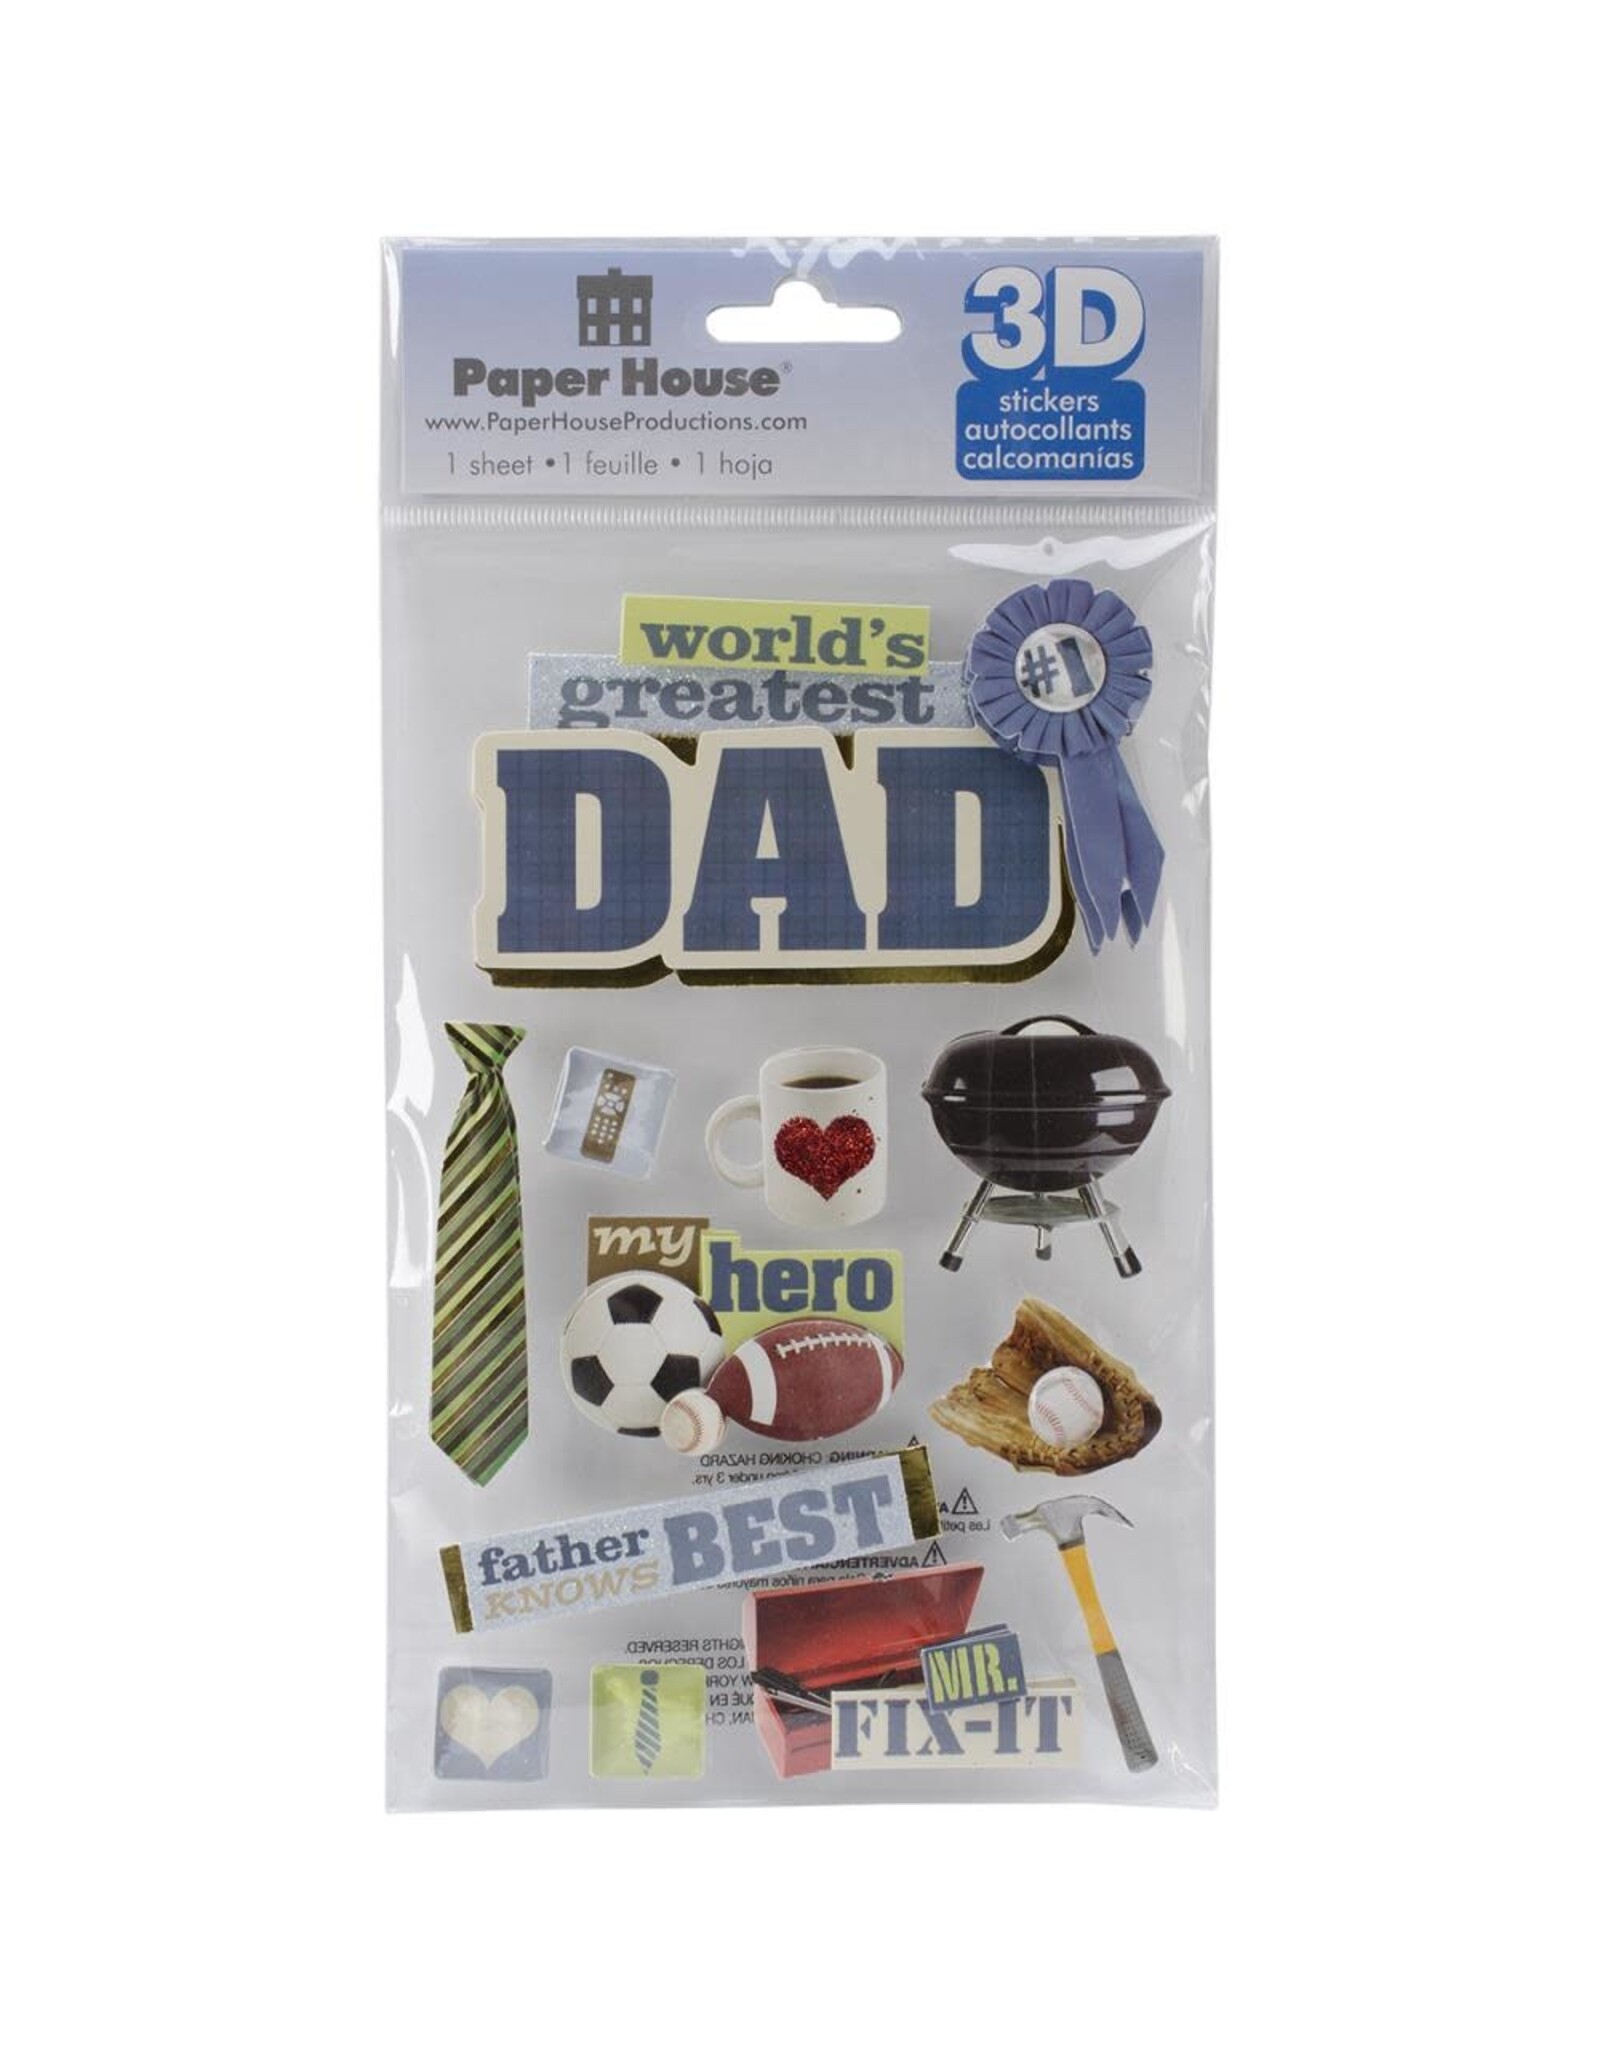 PAPER HOUSE PRODUCTIONS PAPER HOUSE DAD 3D STICKERS 4.5x7.5